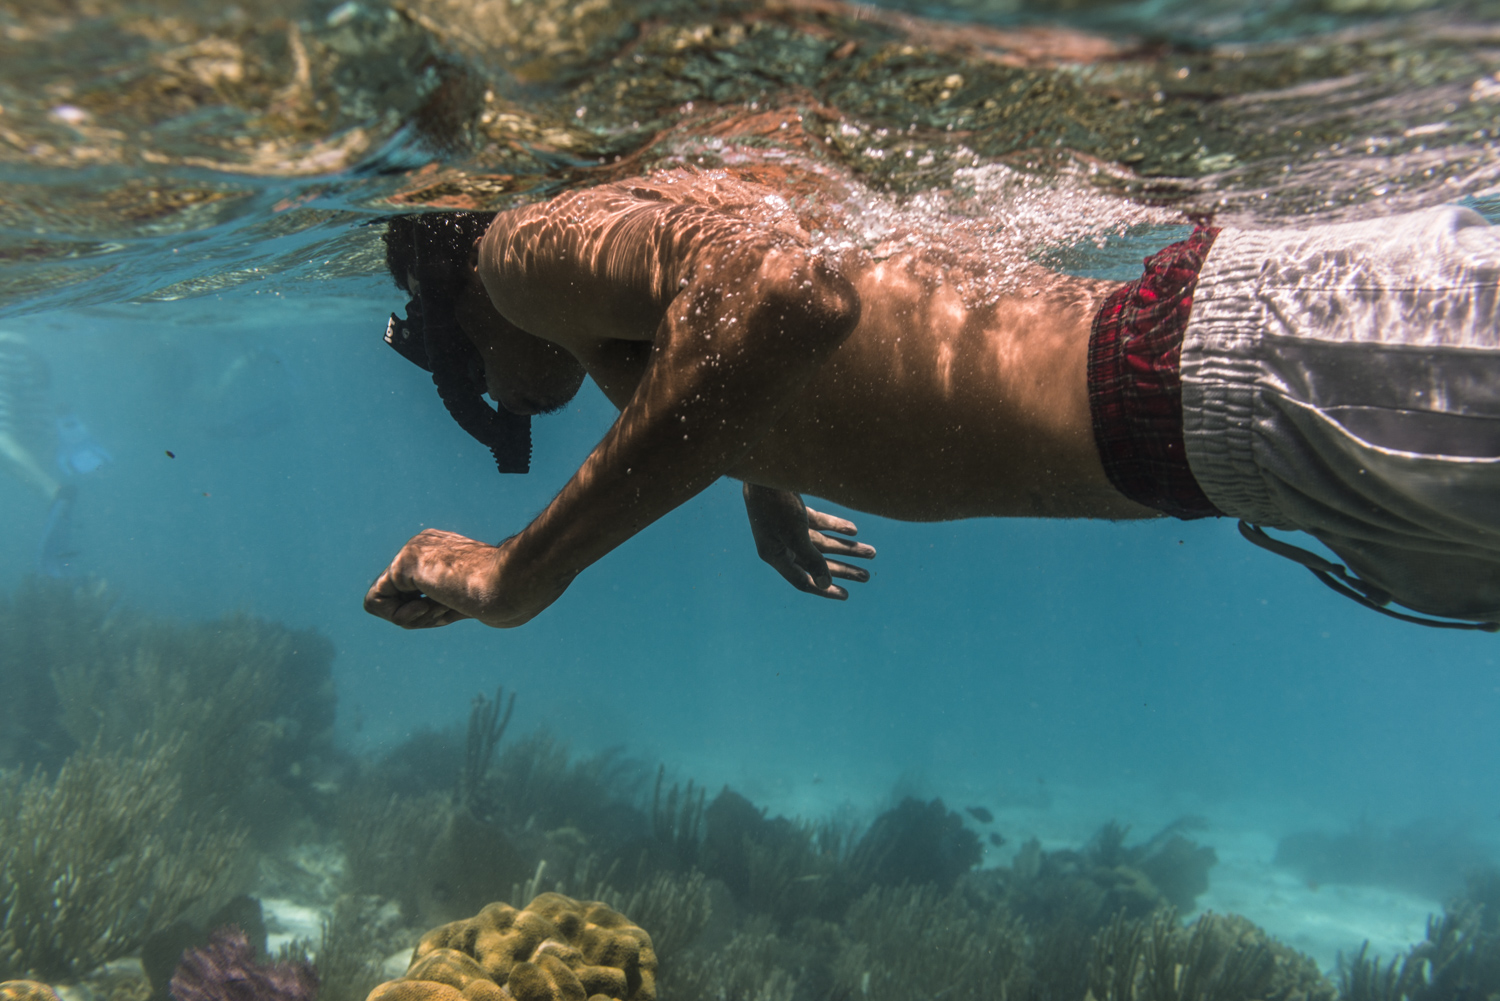 A snorkeler exploring the Mexico Rock, one of many things to do in Ambergris Caye